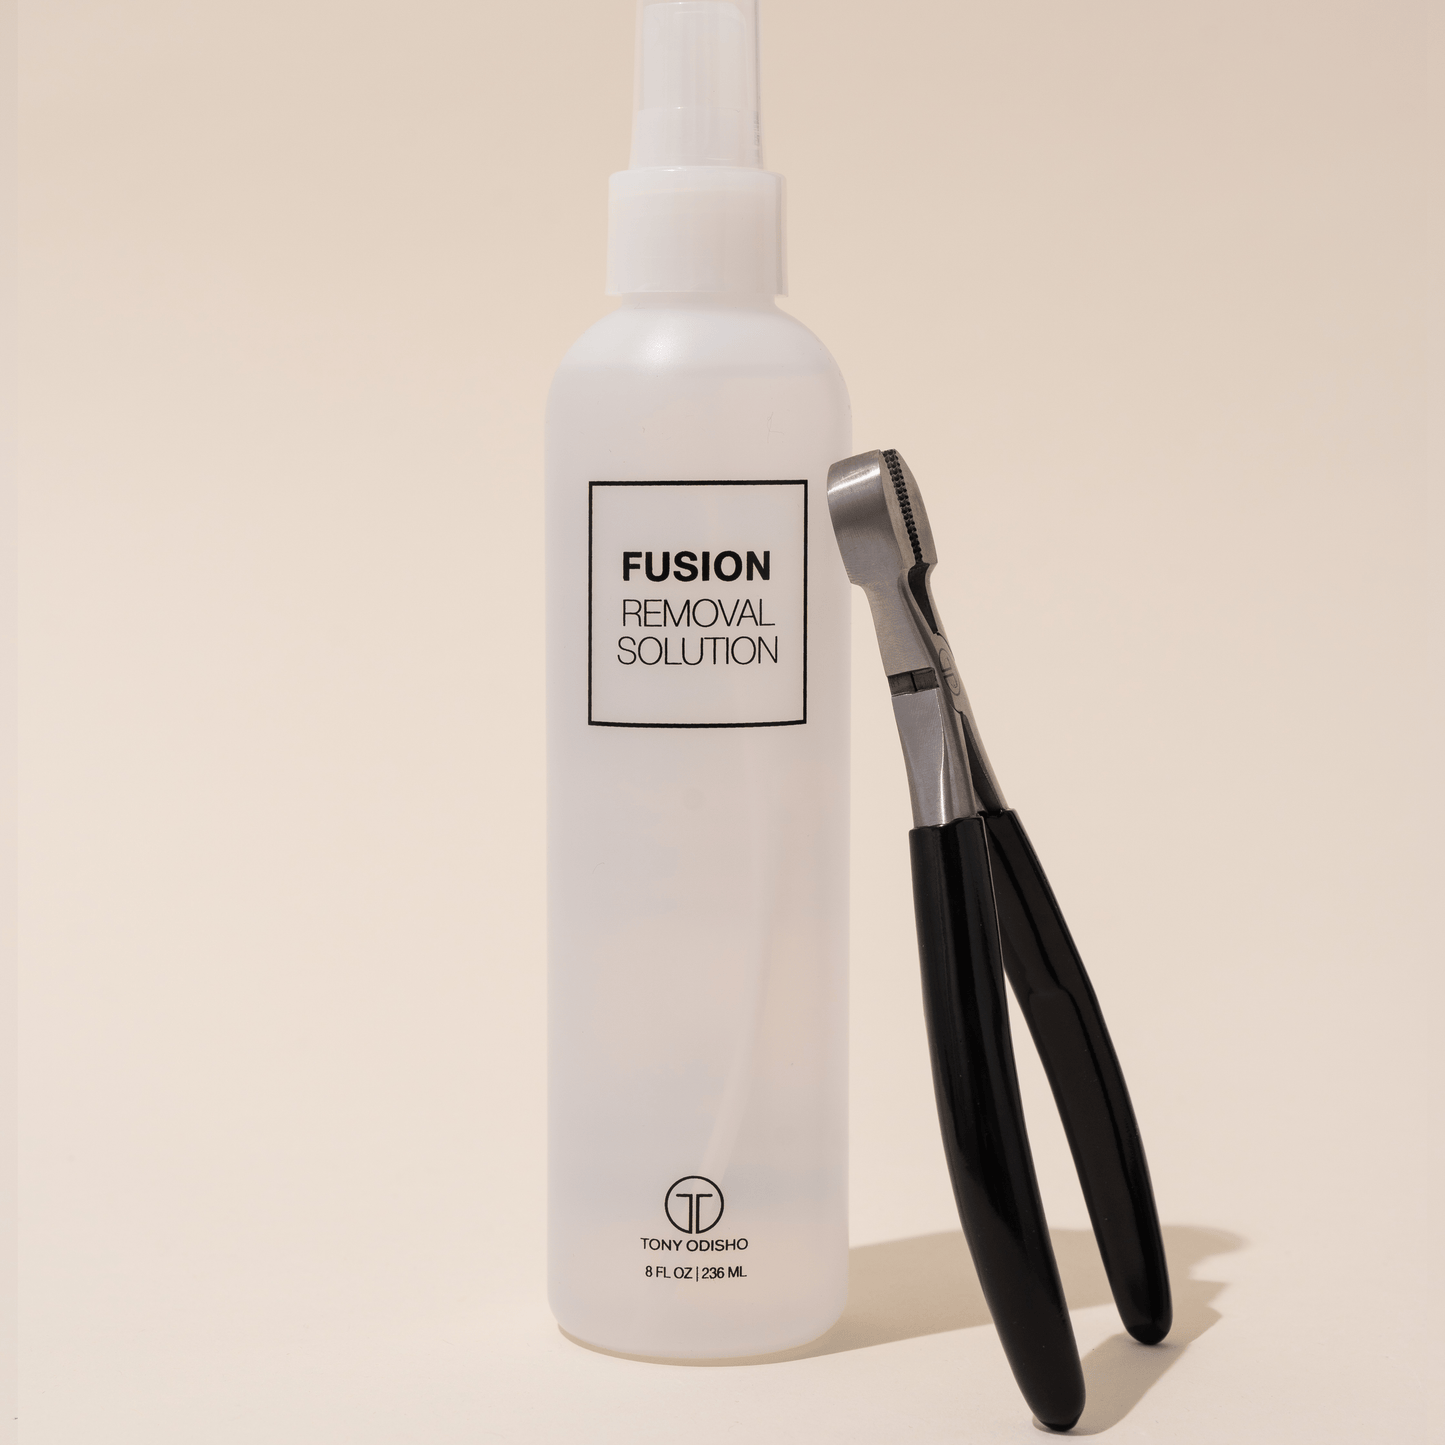 Fusion Removal Solution 8oz Fusion Hair Extension Tools Liquid Technology 